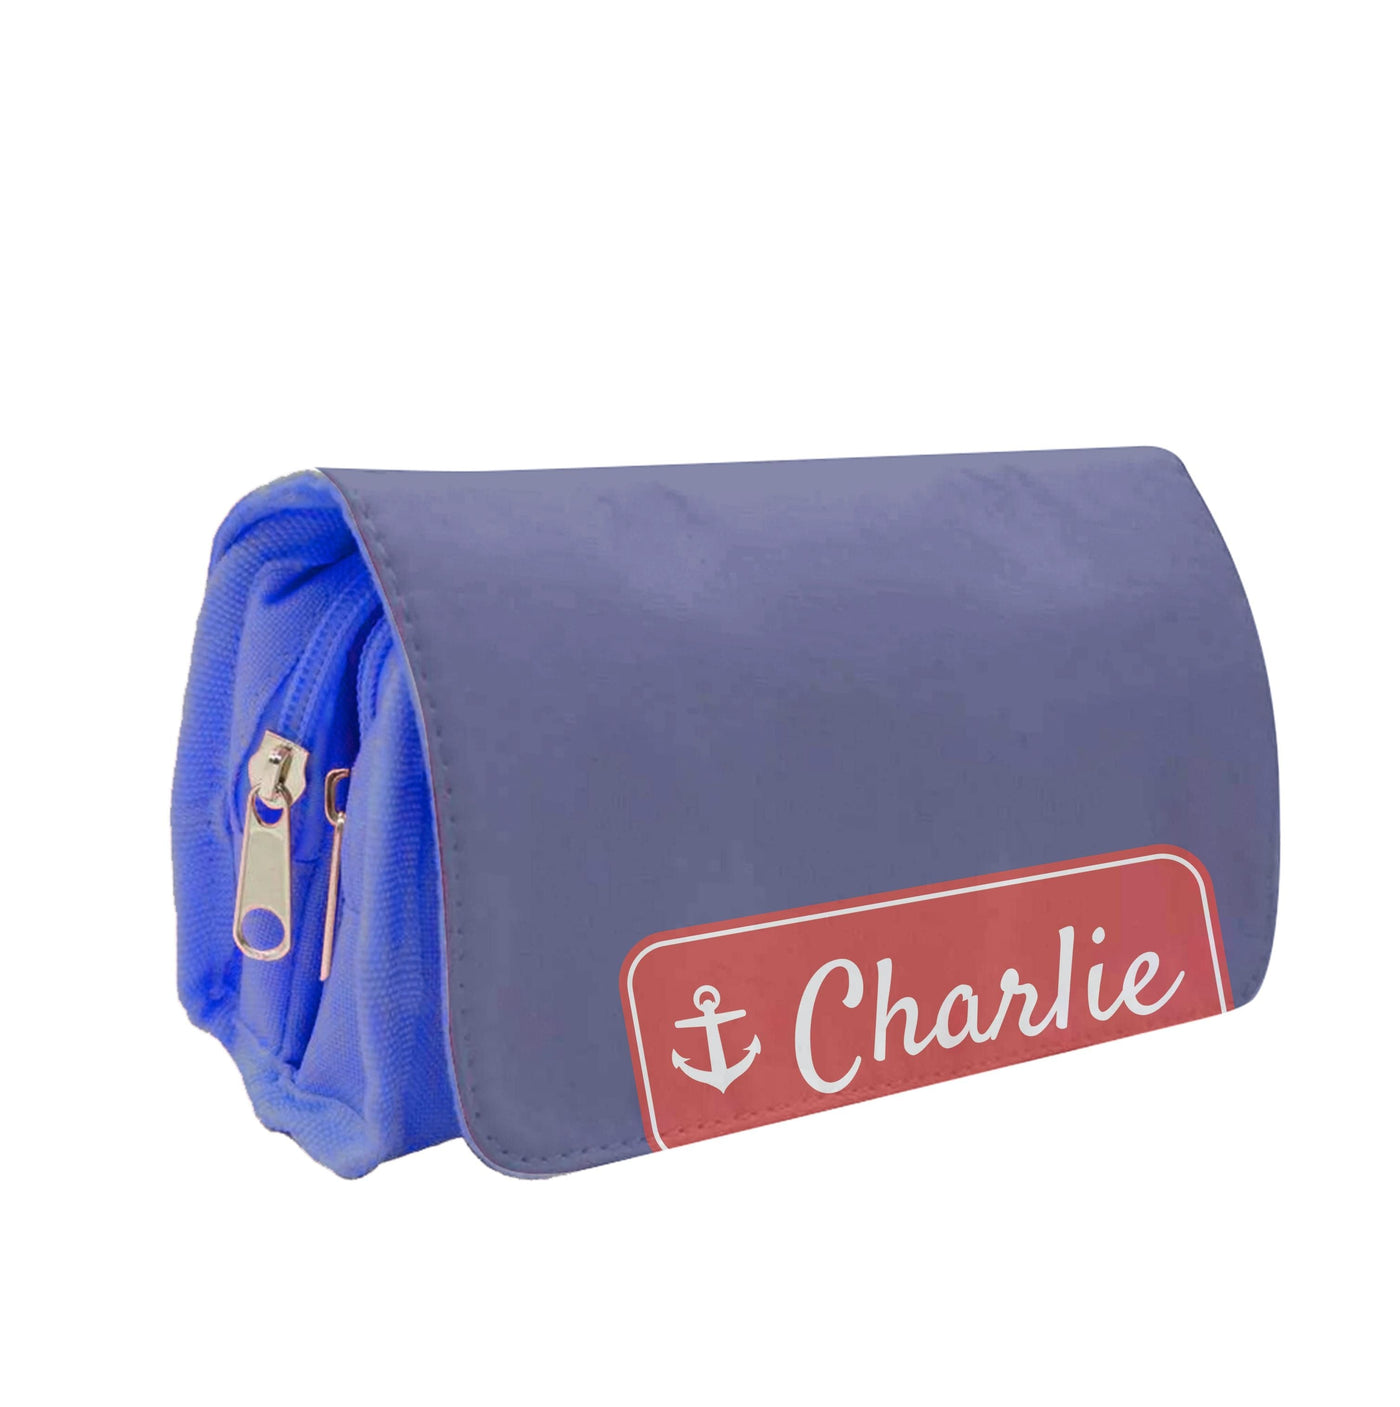 Scoops Ahoy Name Tag - Personalised Stranger Things Pencil Case